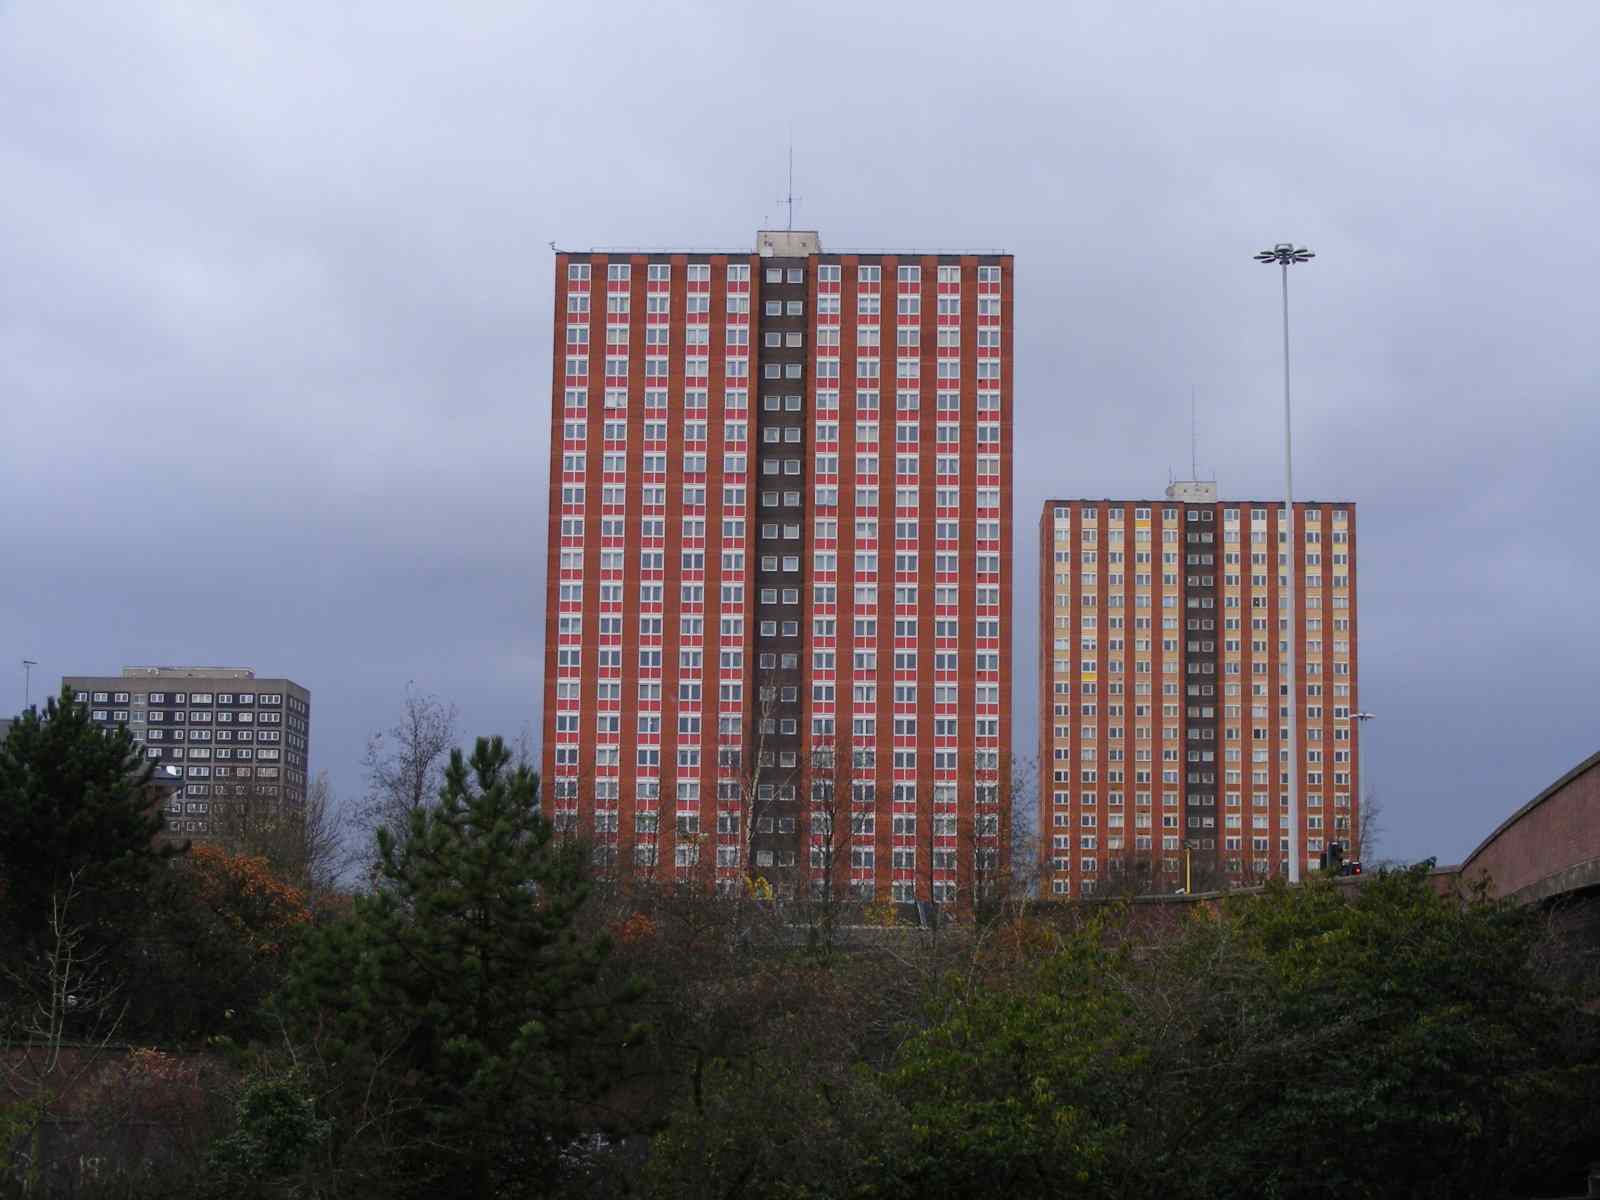 chris saggers fell off washing windows from the salford tower block.